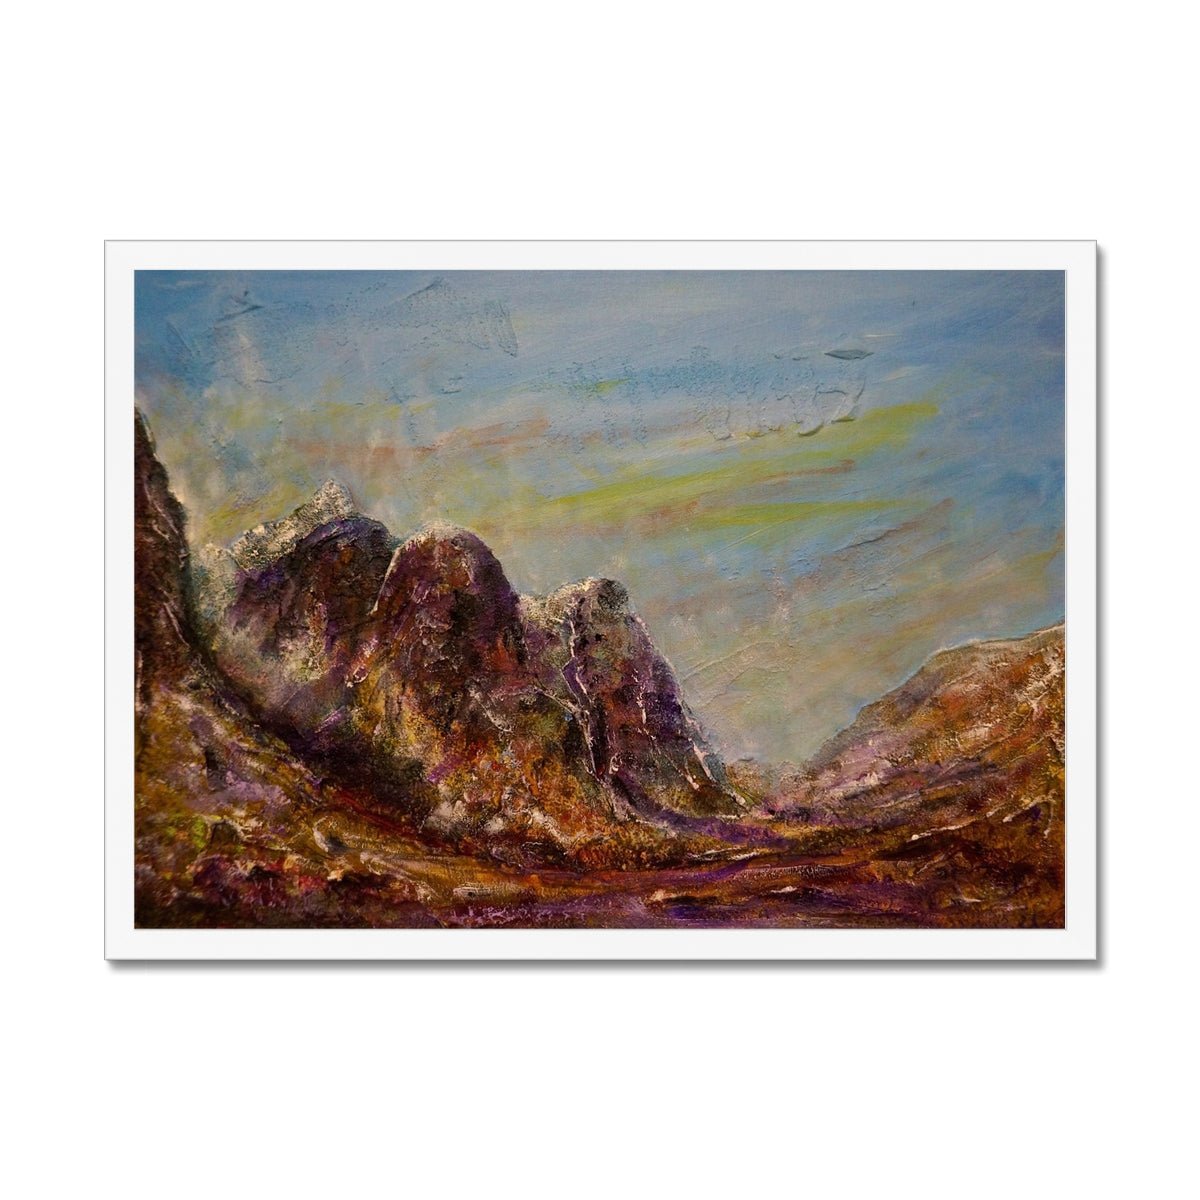 Three Sisters Glencoe Painting | Framed Prints From Scotland-Framed Prints-Glencoe Art Gallery-A2 Landscape-White Frame-Paintings, Prints, Homeware, Art Gifts From Scotland By Scottish Artist Kevin Hunter